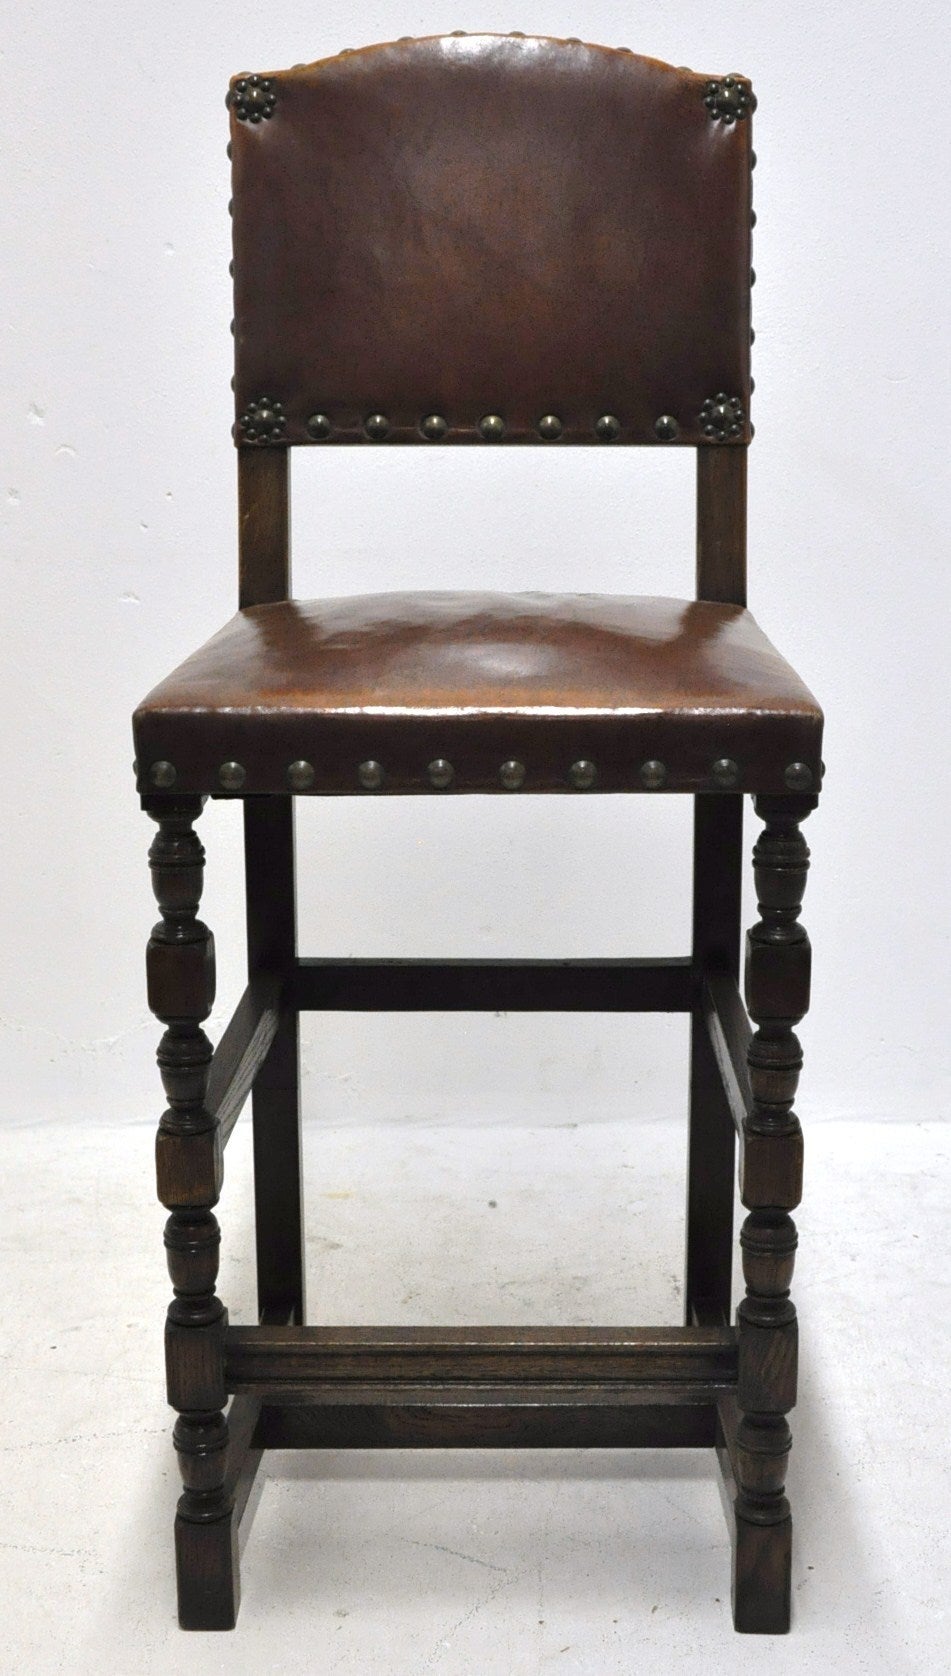 Set of 6 bar stools covered with original leather and brass nails (c:1900). These stools can be sold separately.